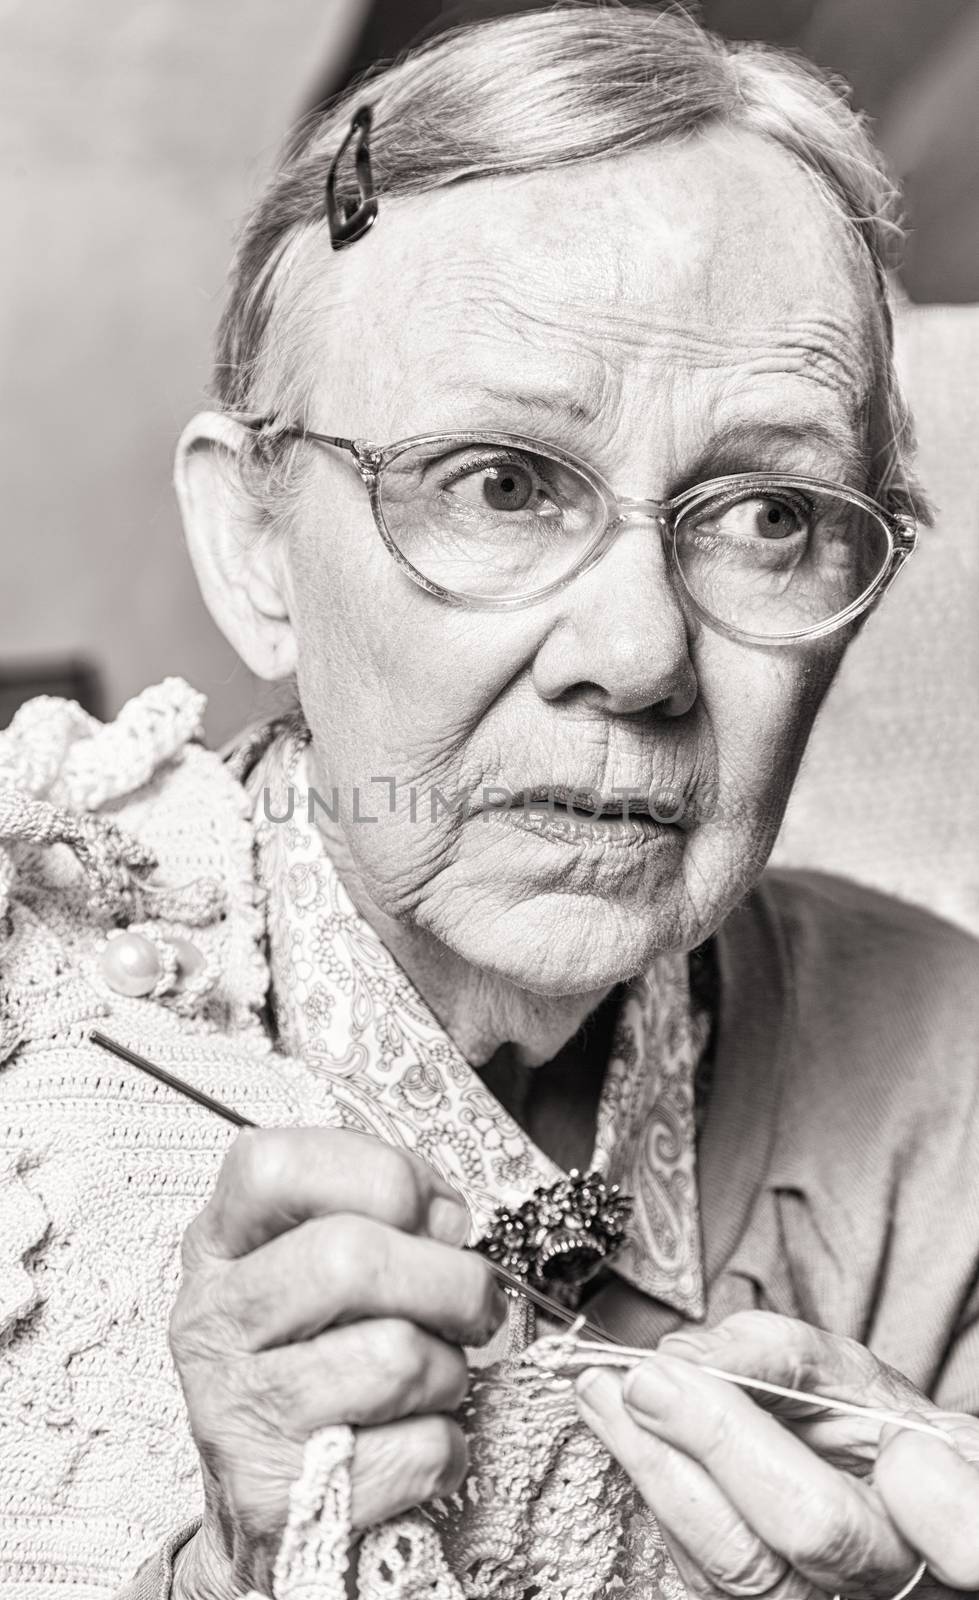 Toned image of old woman crocheting with worried expression